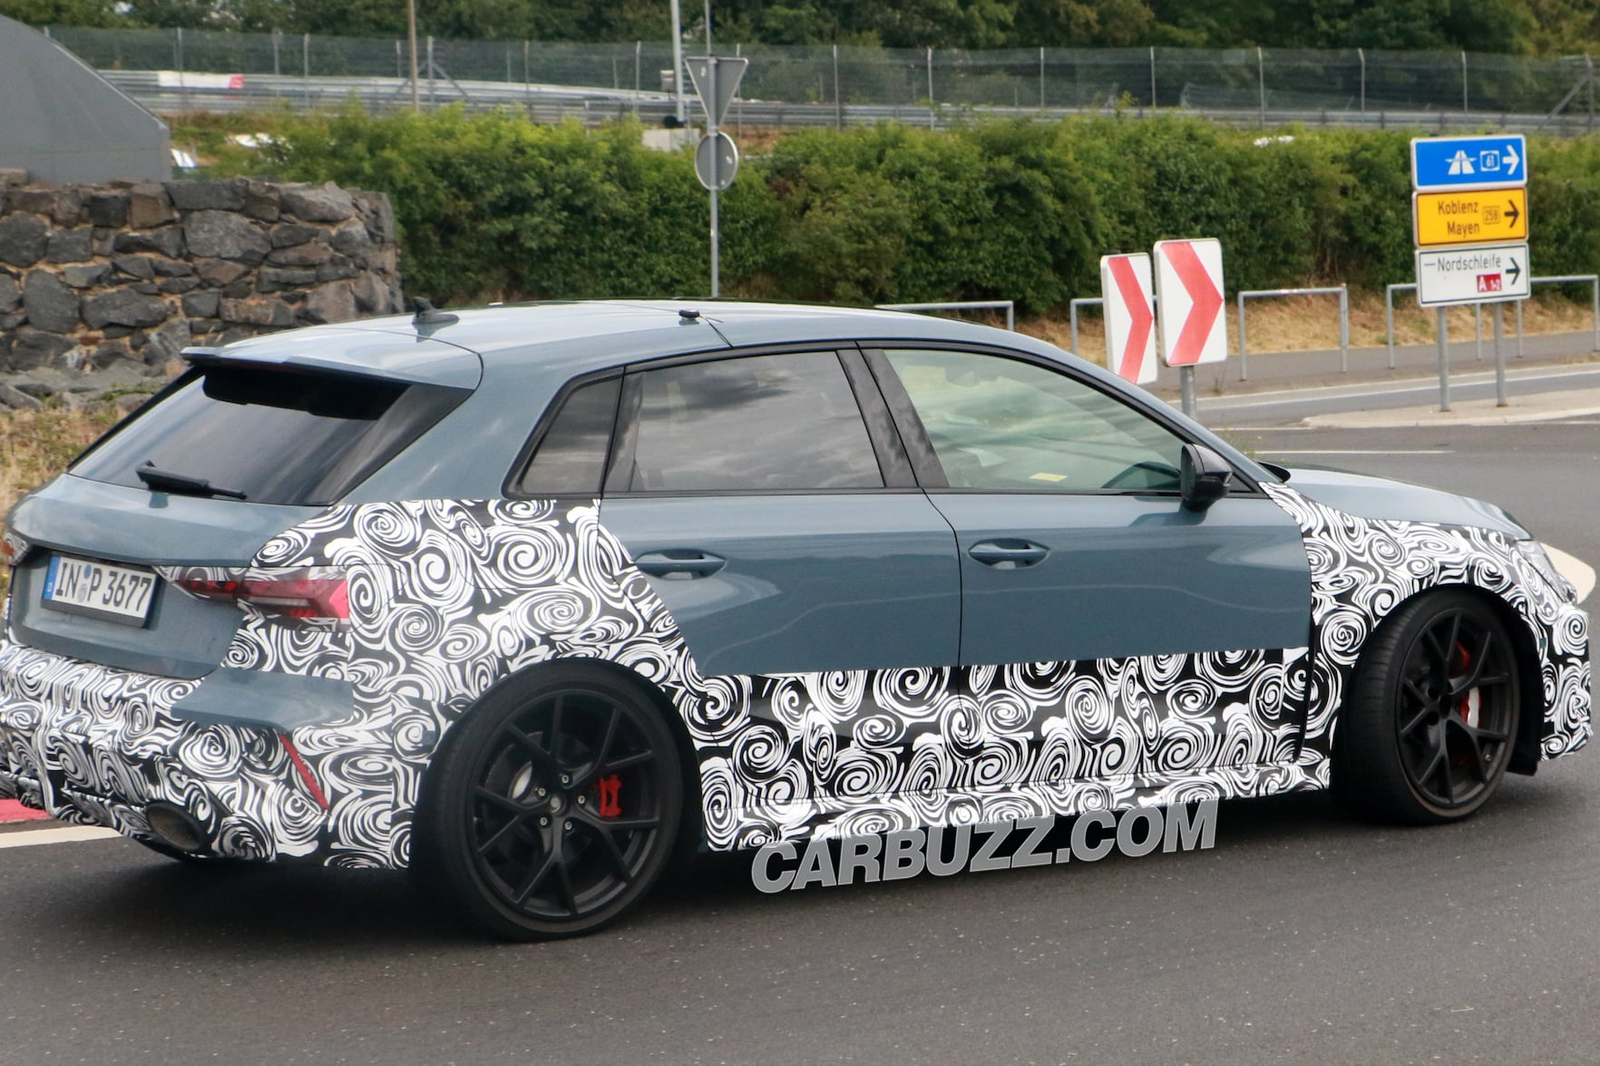 spy shots, sports cars, audi rs3 facelift spotted hiding heavy aesthetic updates